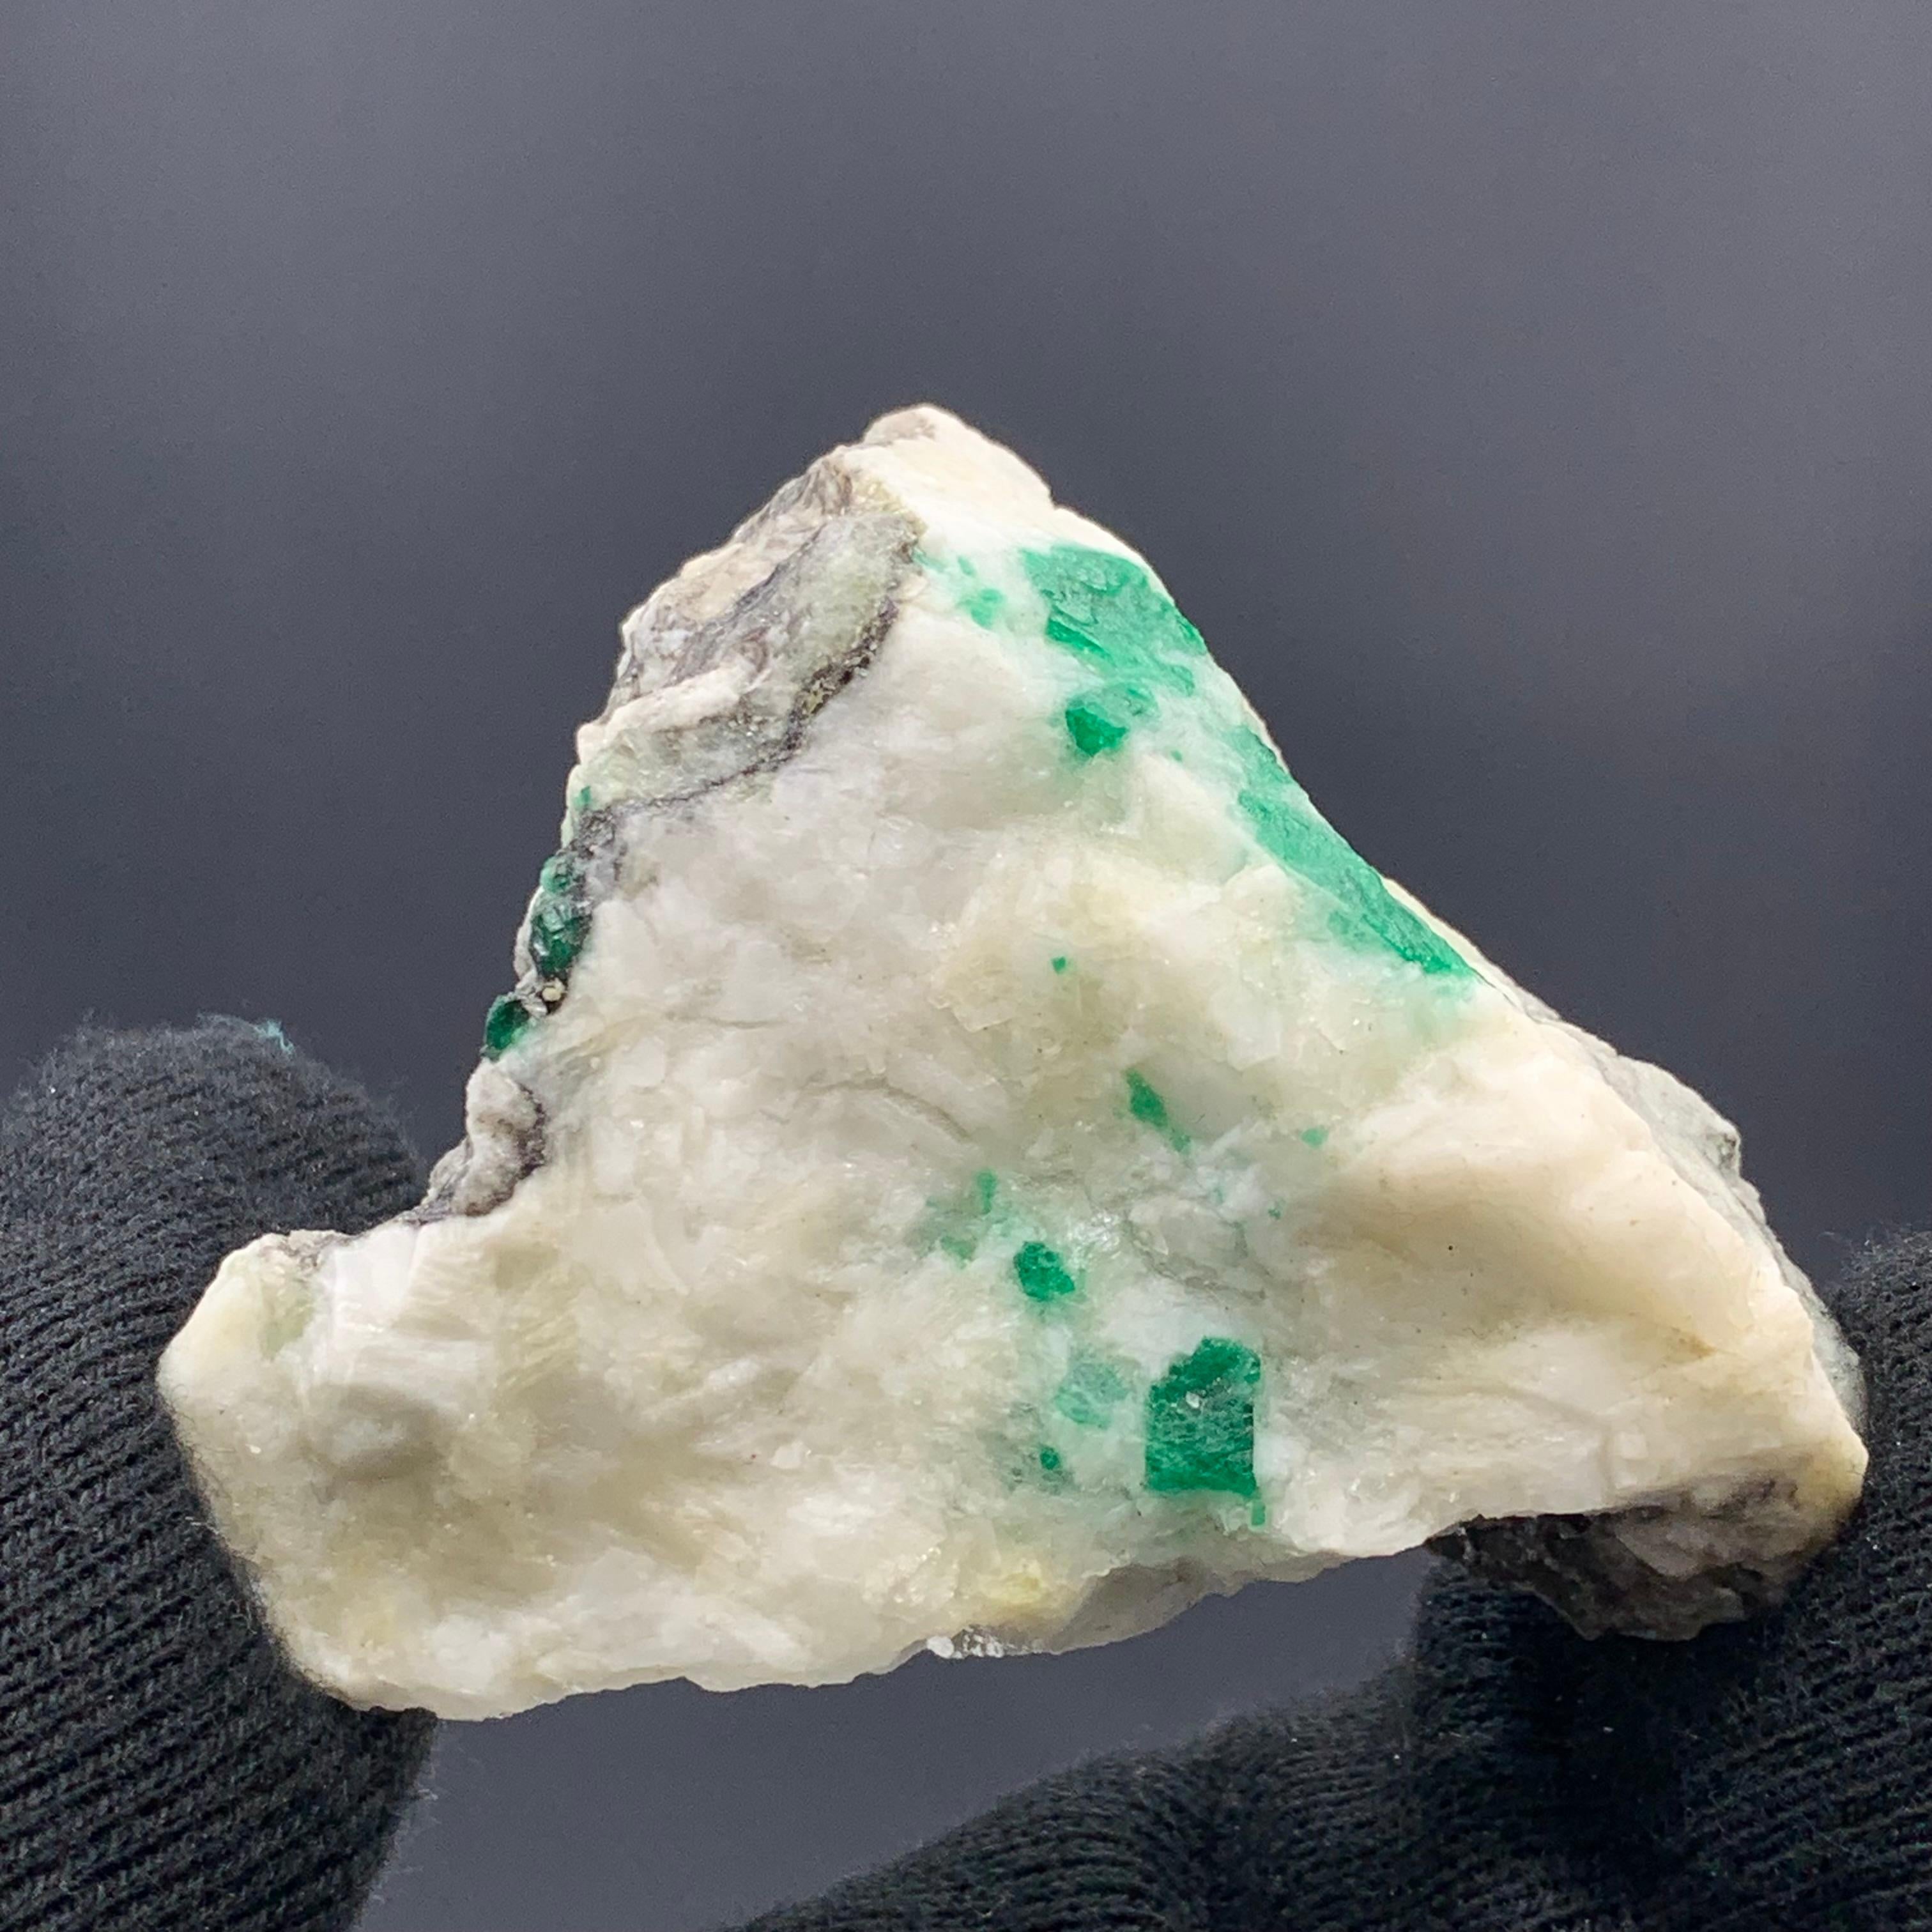 Other 60.78 Gram Amazing Emerald Specimen From Swat Valley, Pakistan  For Sale